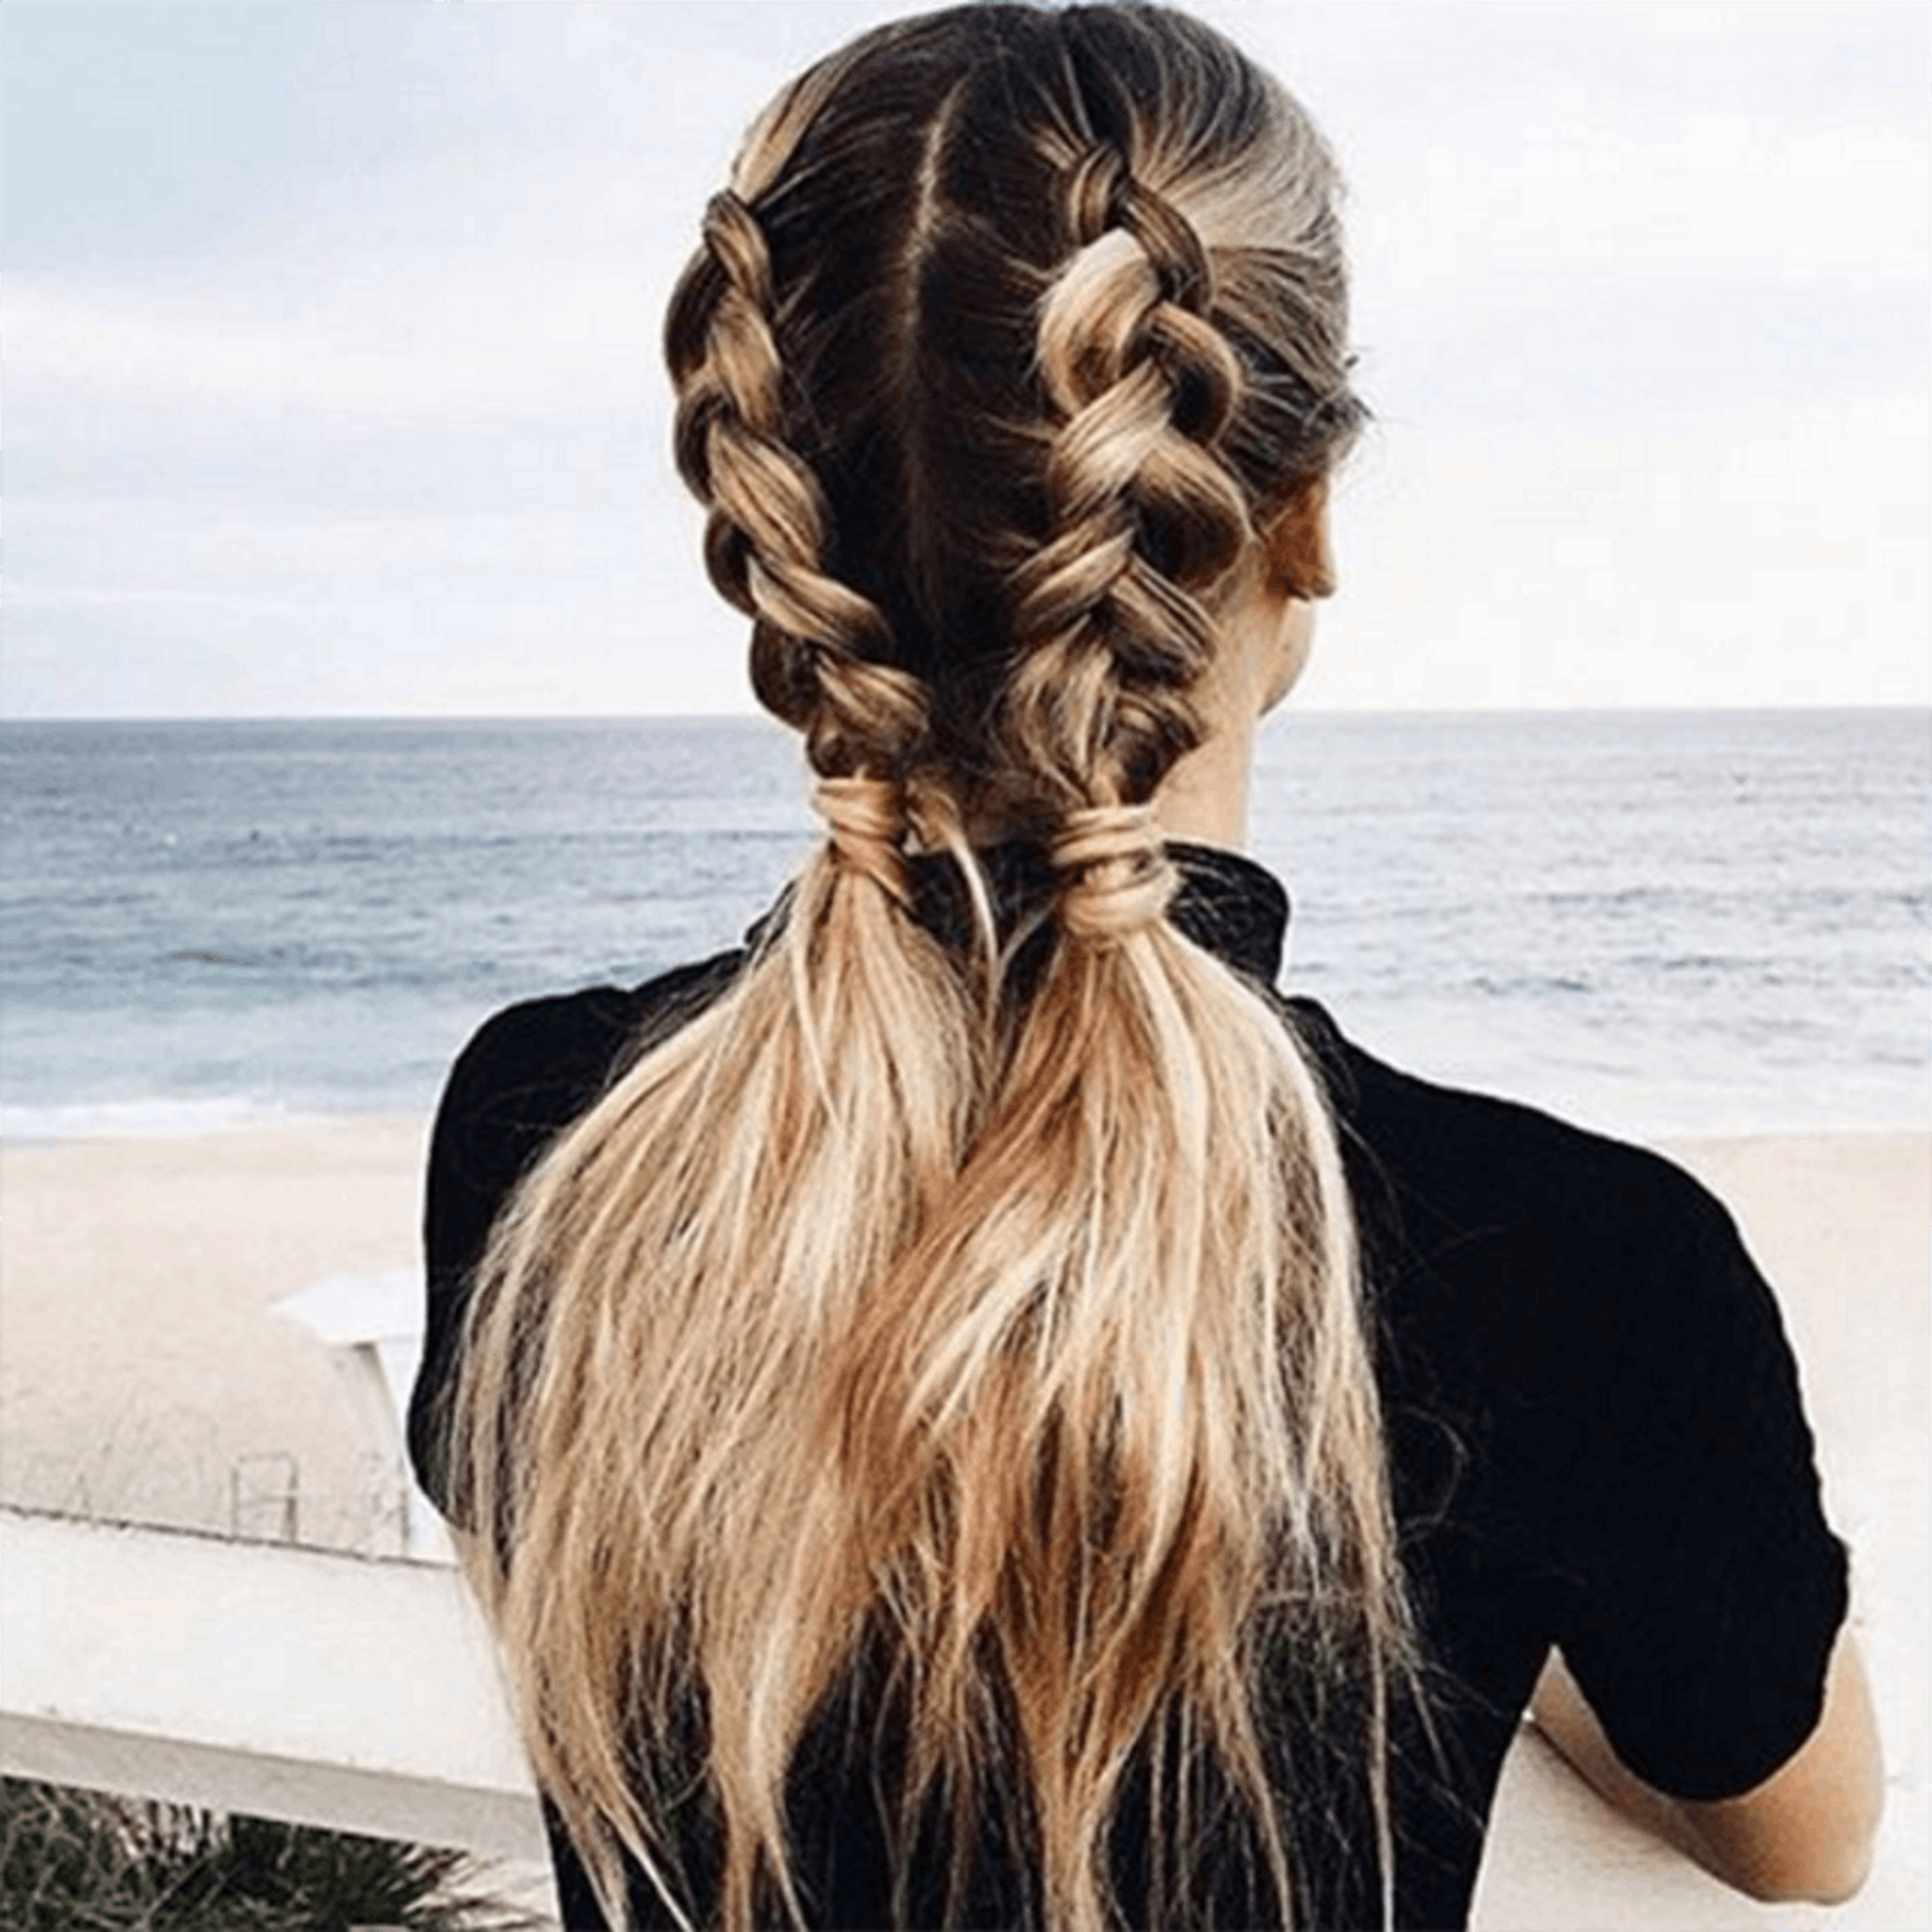 11 Ways to Wear Braided Pigtails That Don’t Look Childish